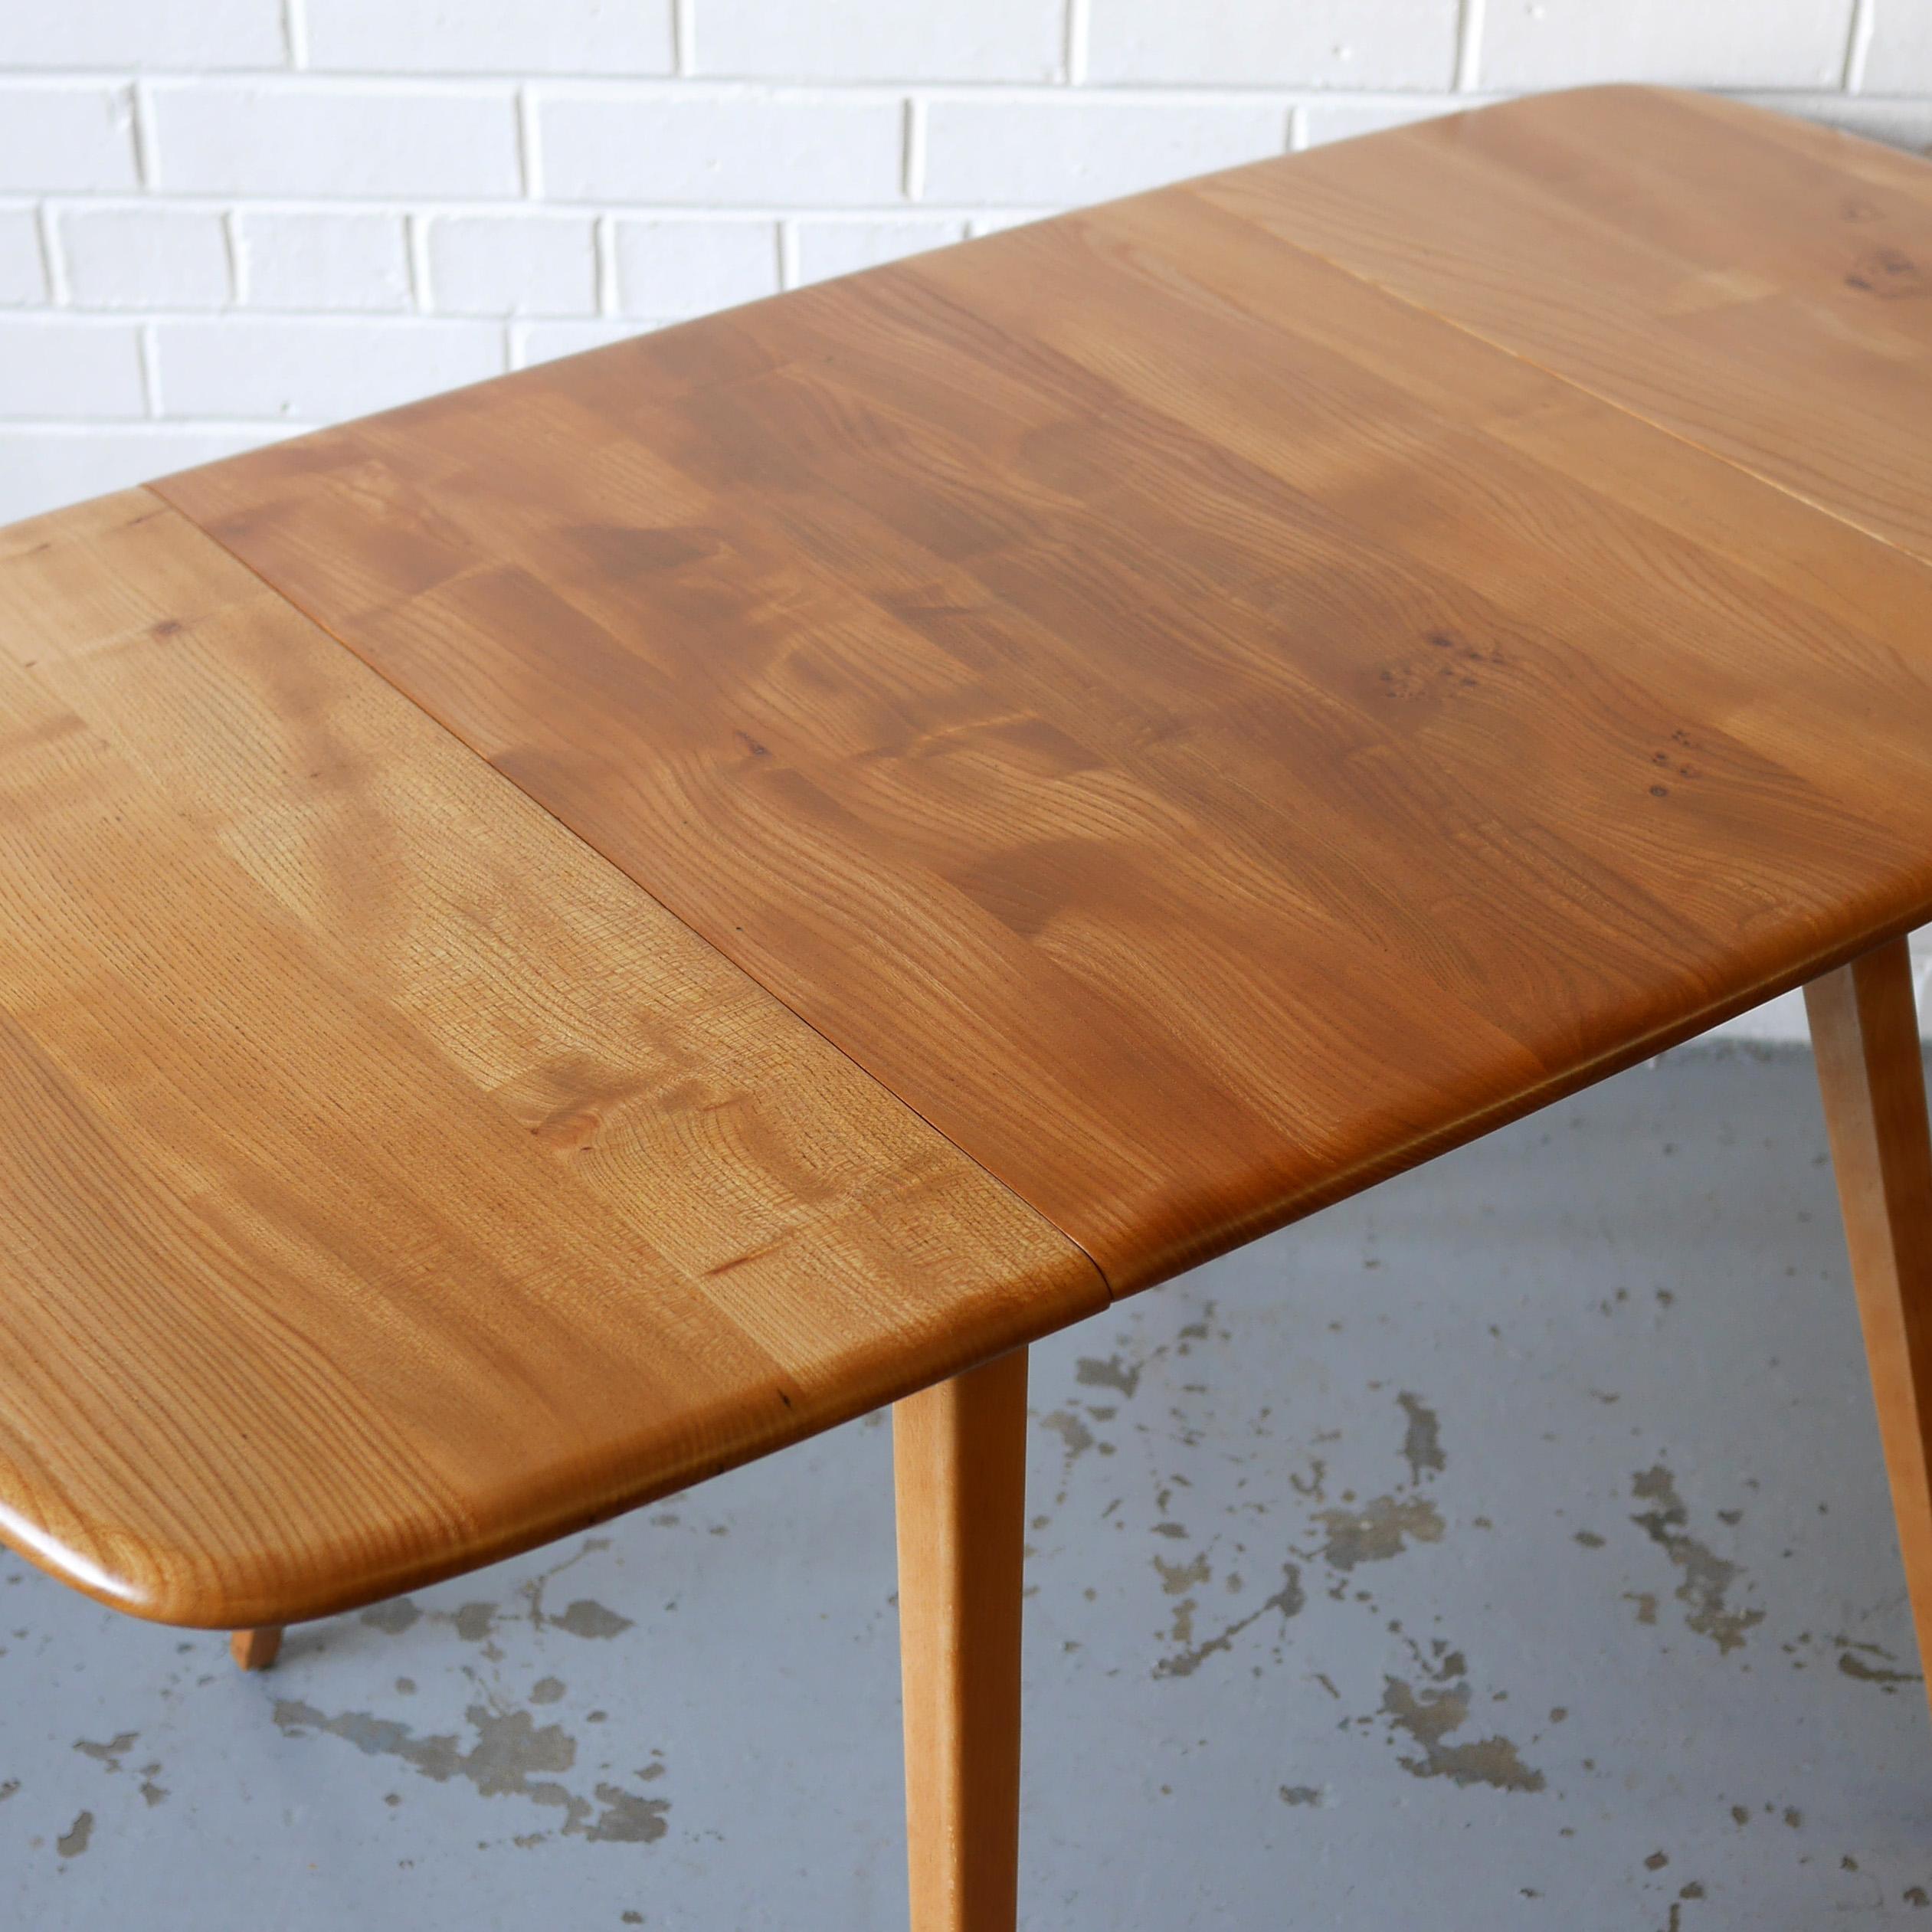 A lovely design from circa 1965 that is especially useful for where space is limited, it will seat 4 in comfort but can accomodate up to 6. This example has been fully stripped of its original lacquer finish, lightly sanded and then finished with a